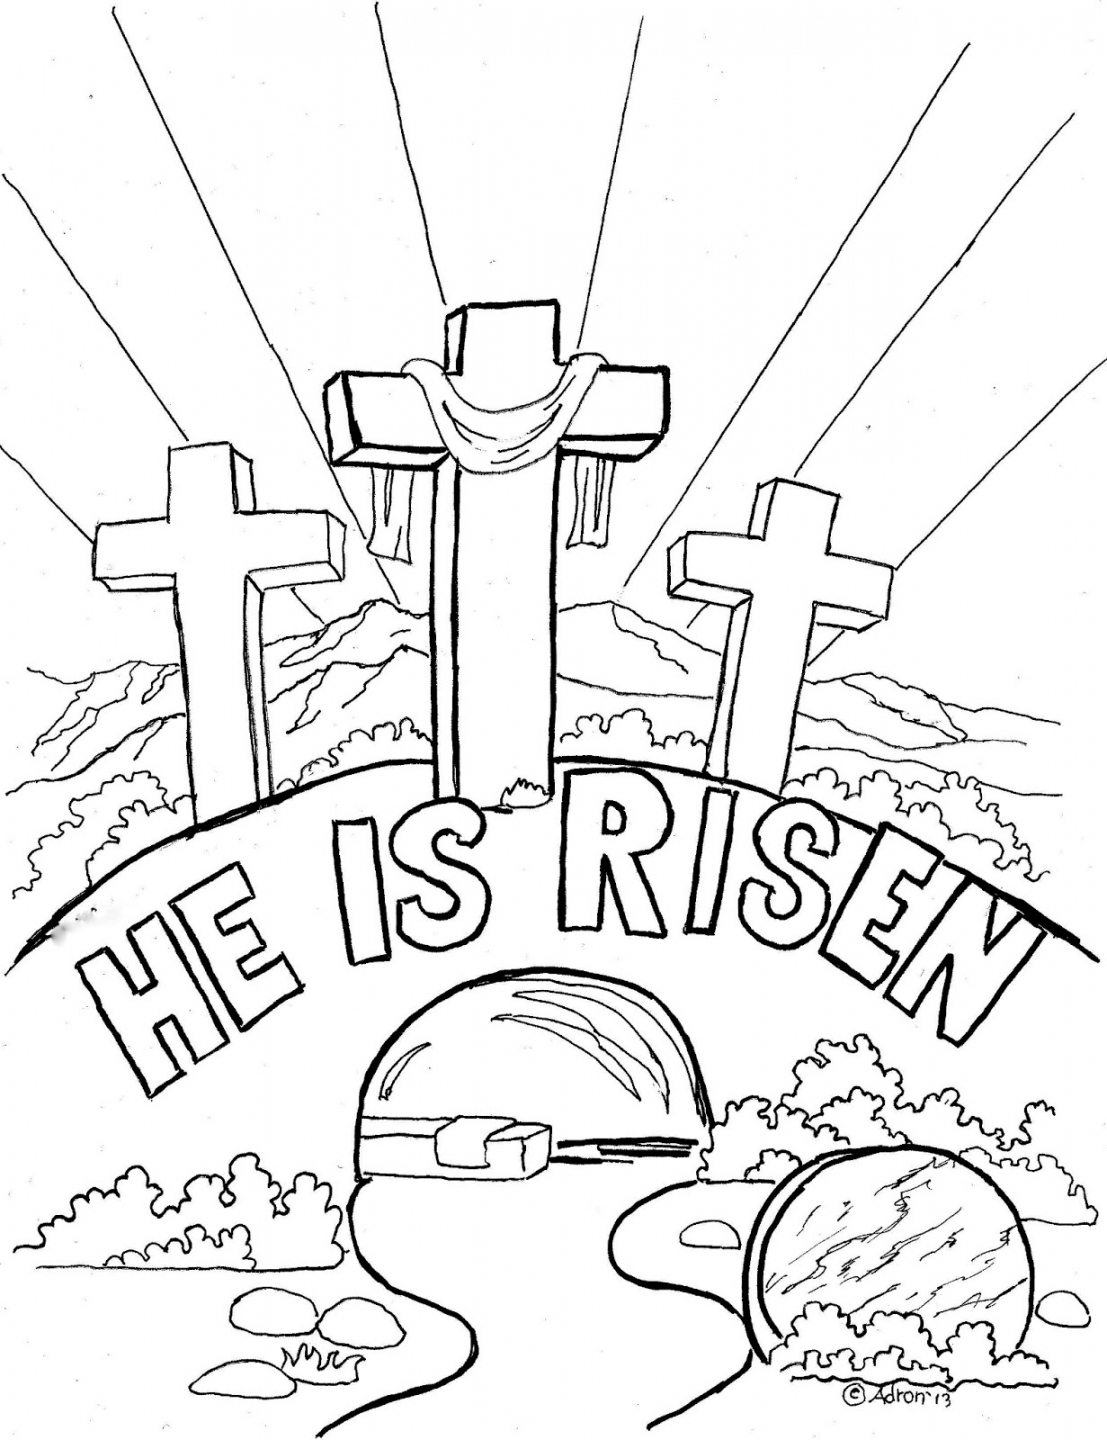 Religious Easter Coloring Pages - Best Coloring Pages For Kids - FREE Printables - Religious Free Printable Religious Easter Coloring Pages